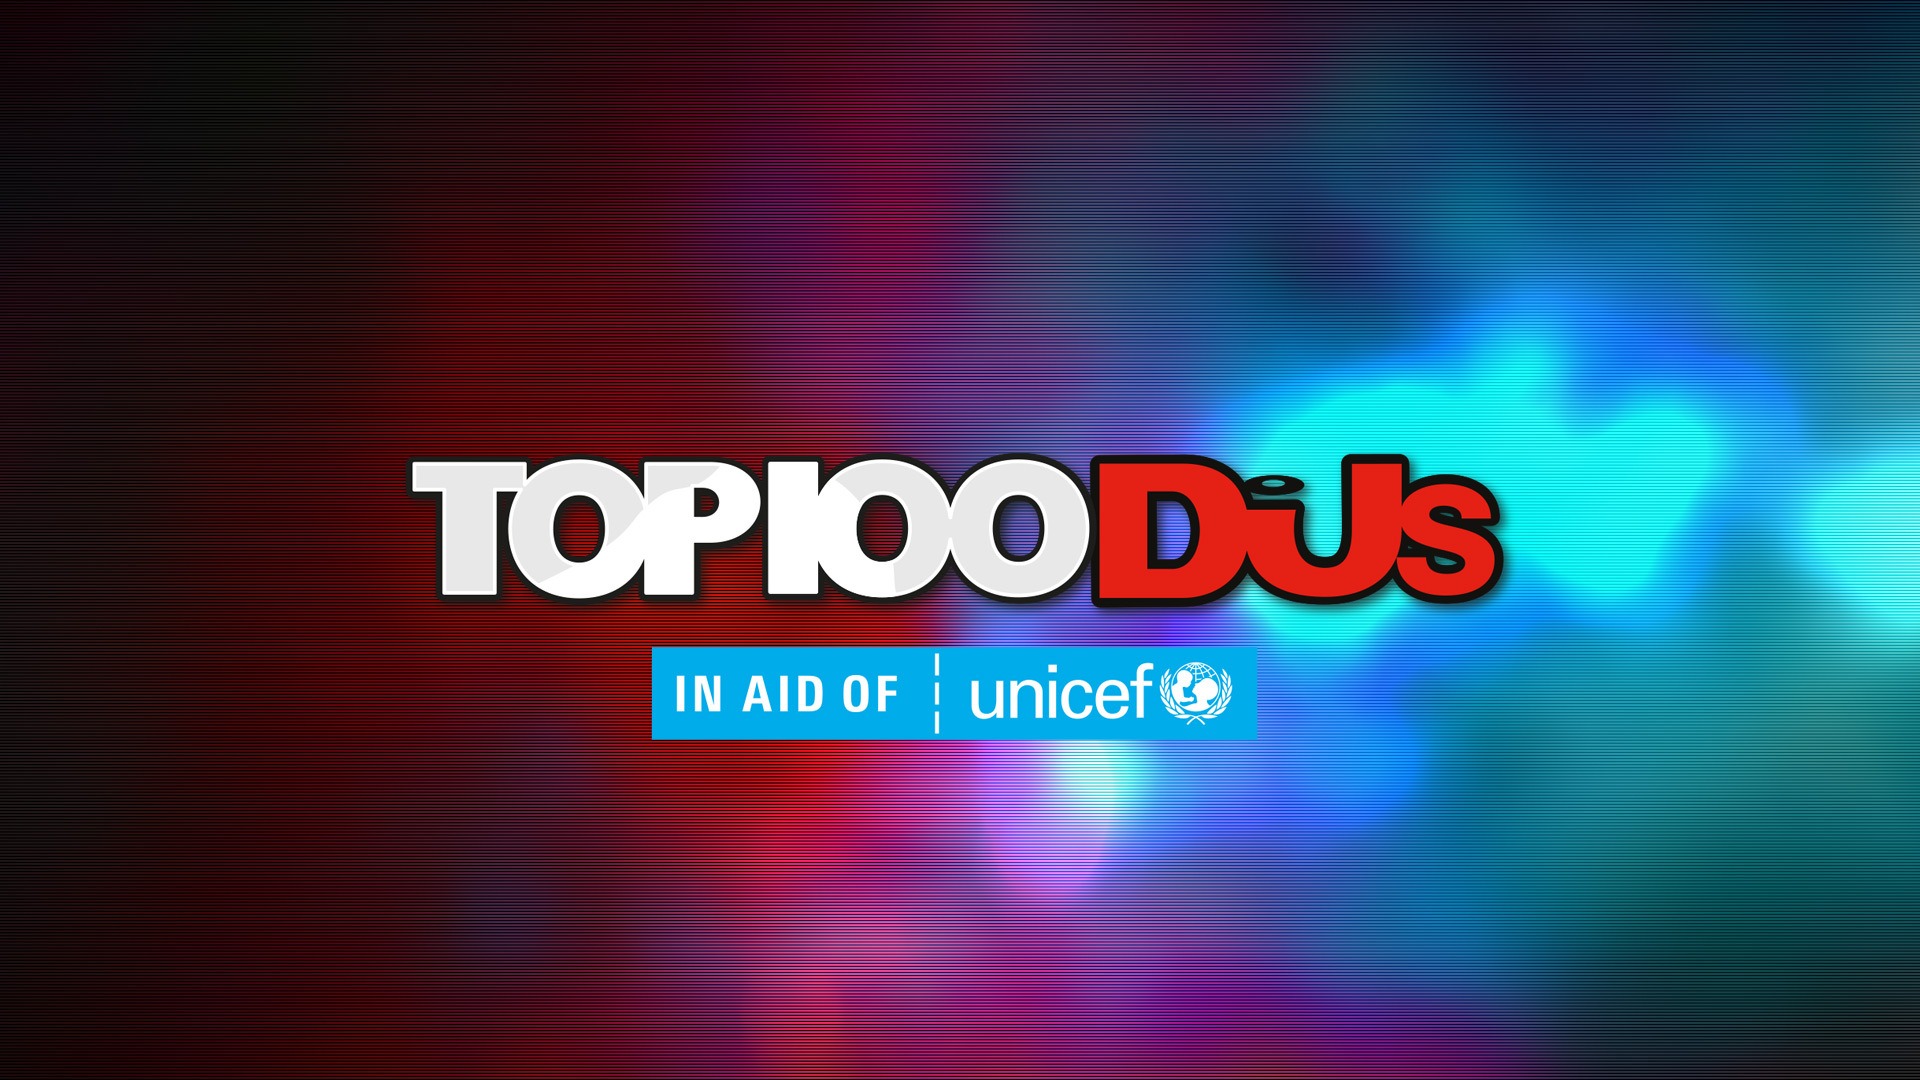 Top 100 DJs 2020: live results countdown